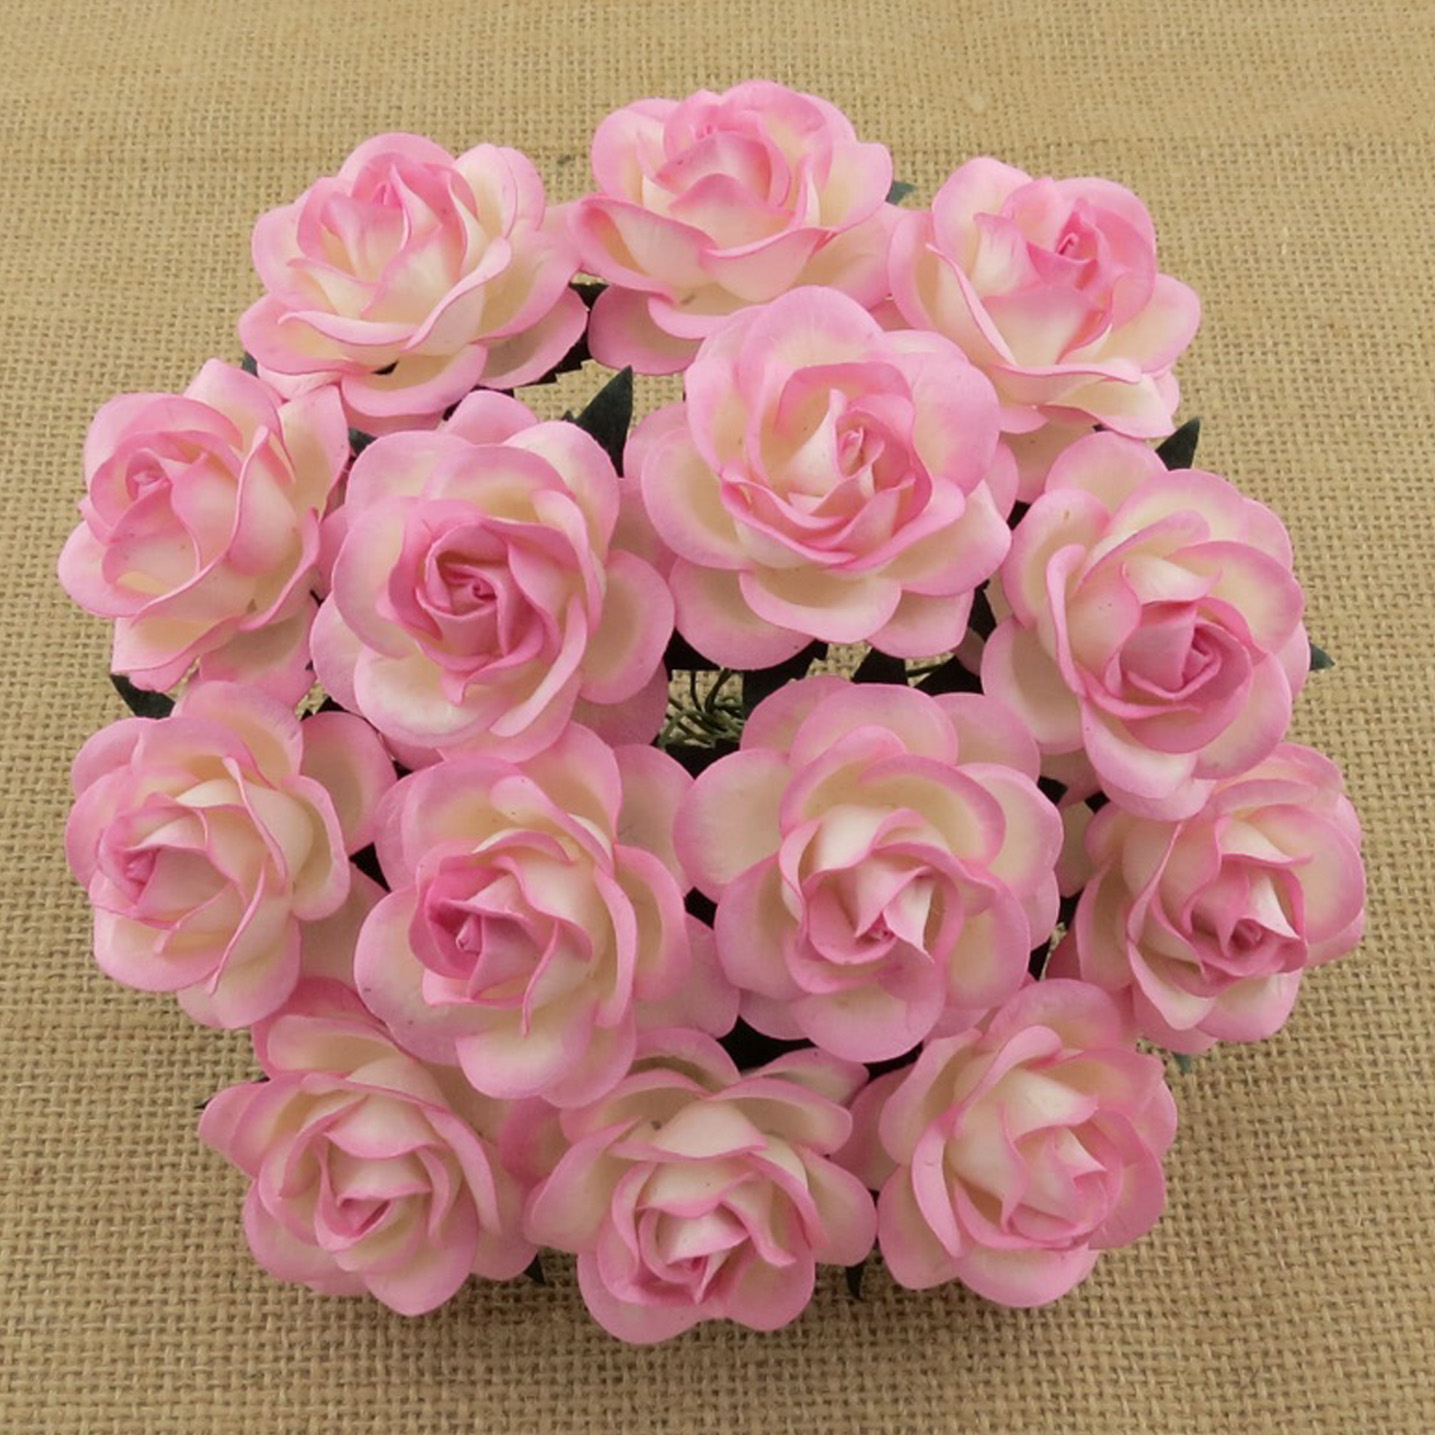 50 2-TONE BABY PINK/IVORY MULBERRY PAPER TRELLIS ROSES